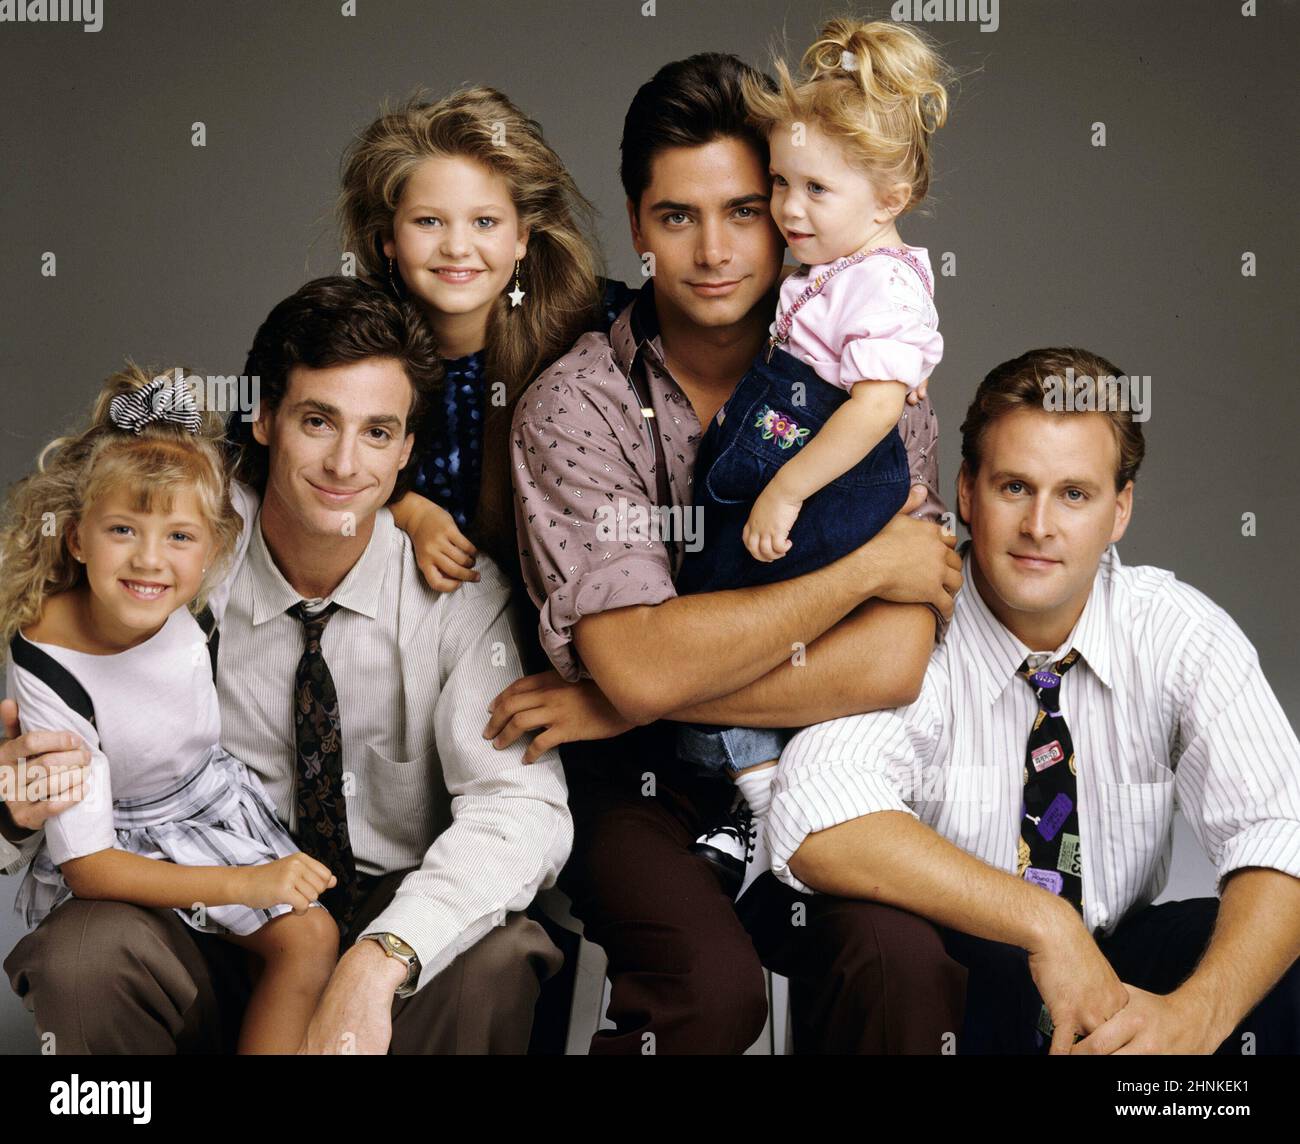 MARY-KATE OLSEN, ASHLEY OLSEN, BOB SAGET, JOHN STAMOS, DAVE COULIER, JODIE SWEETIN and CANDACE CAMERON BURE in FULL HOUSE (1987), directed by JEFF FRANKLIN. Credit: LORIMAR PRODUCTIONS / Album Stock Photo